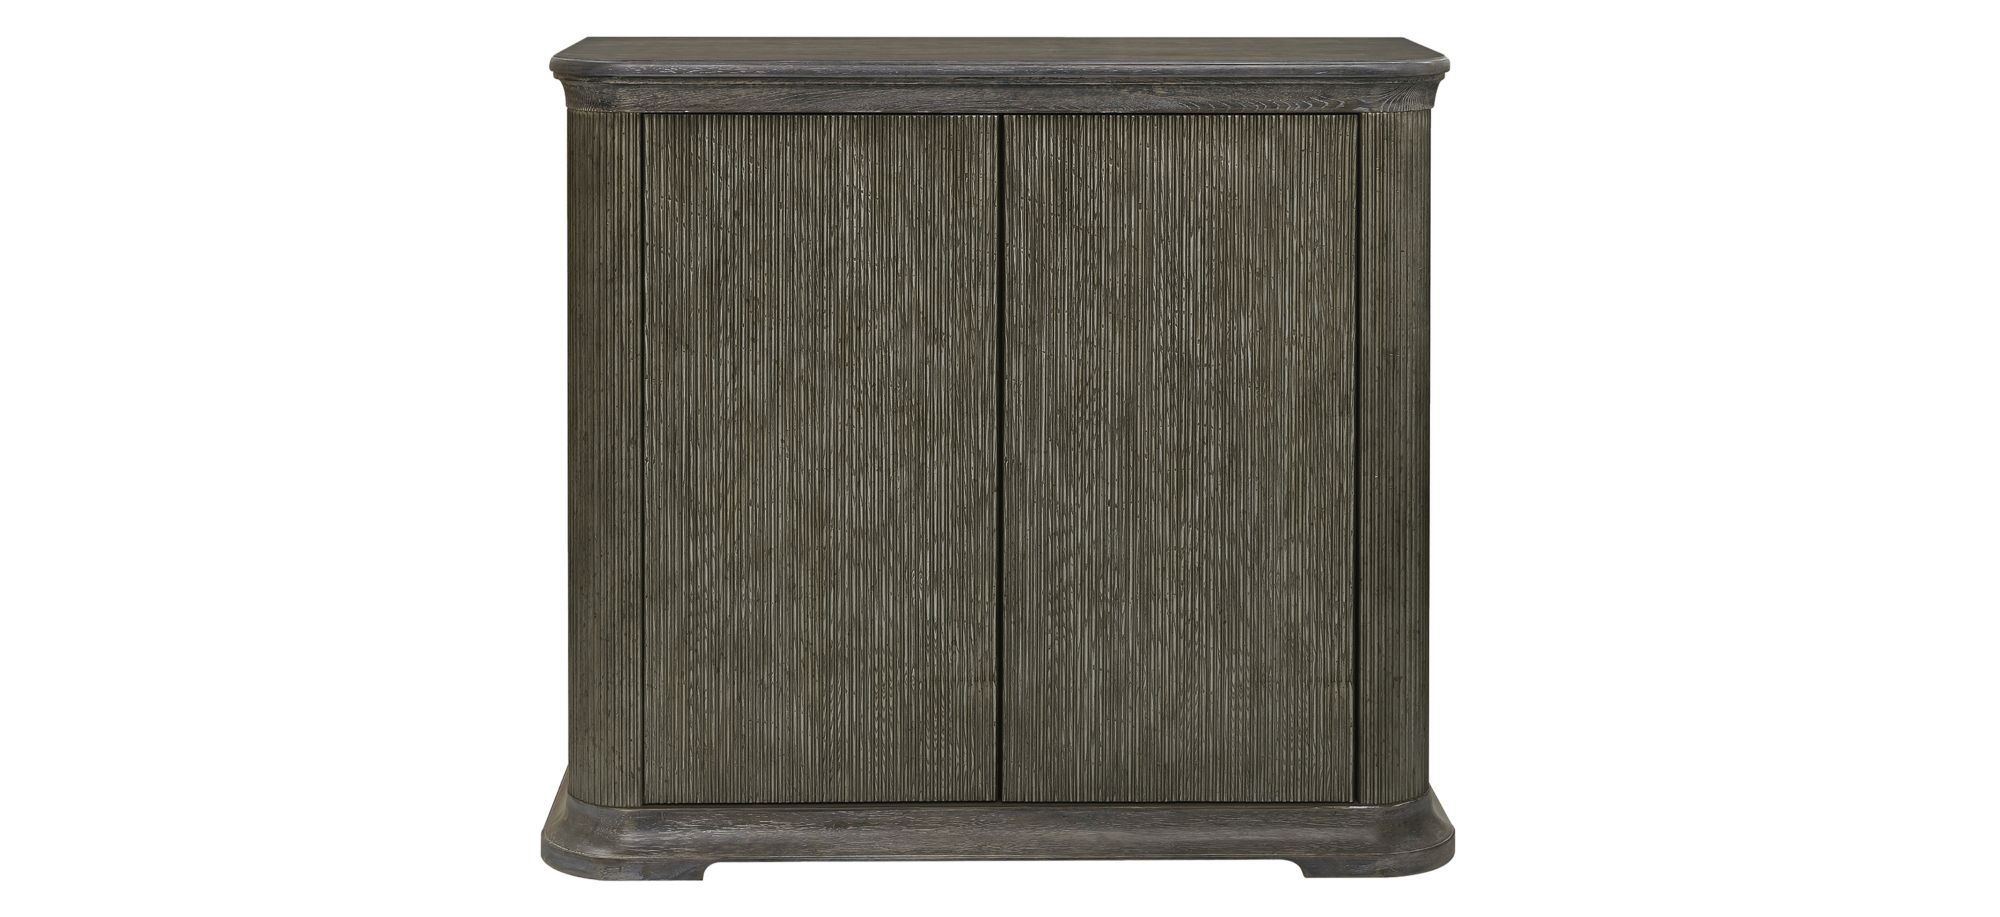 Pulaski Reeded Chest in Gray by Bellanest.